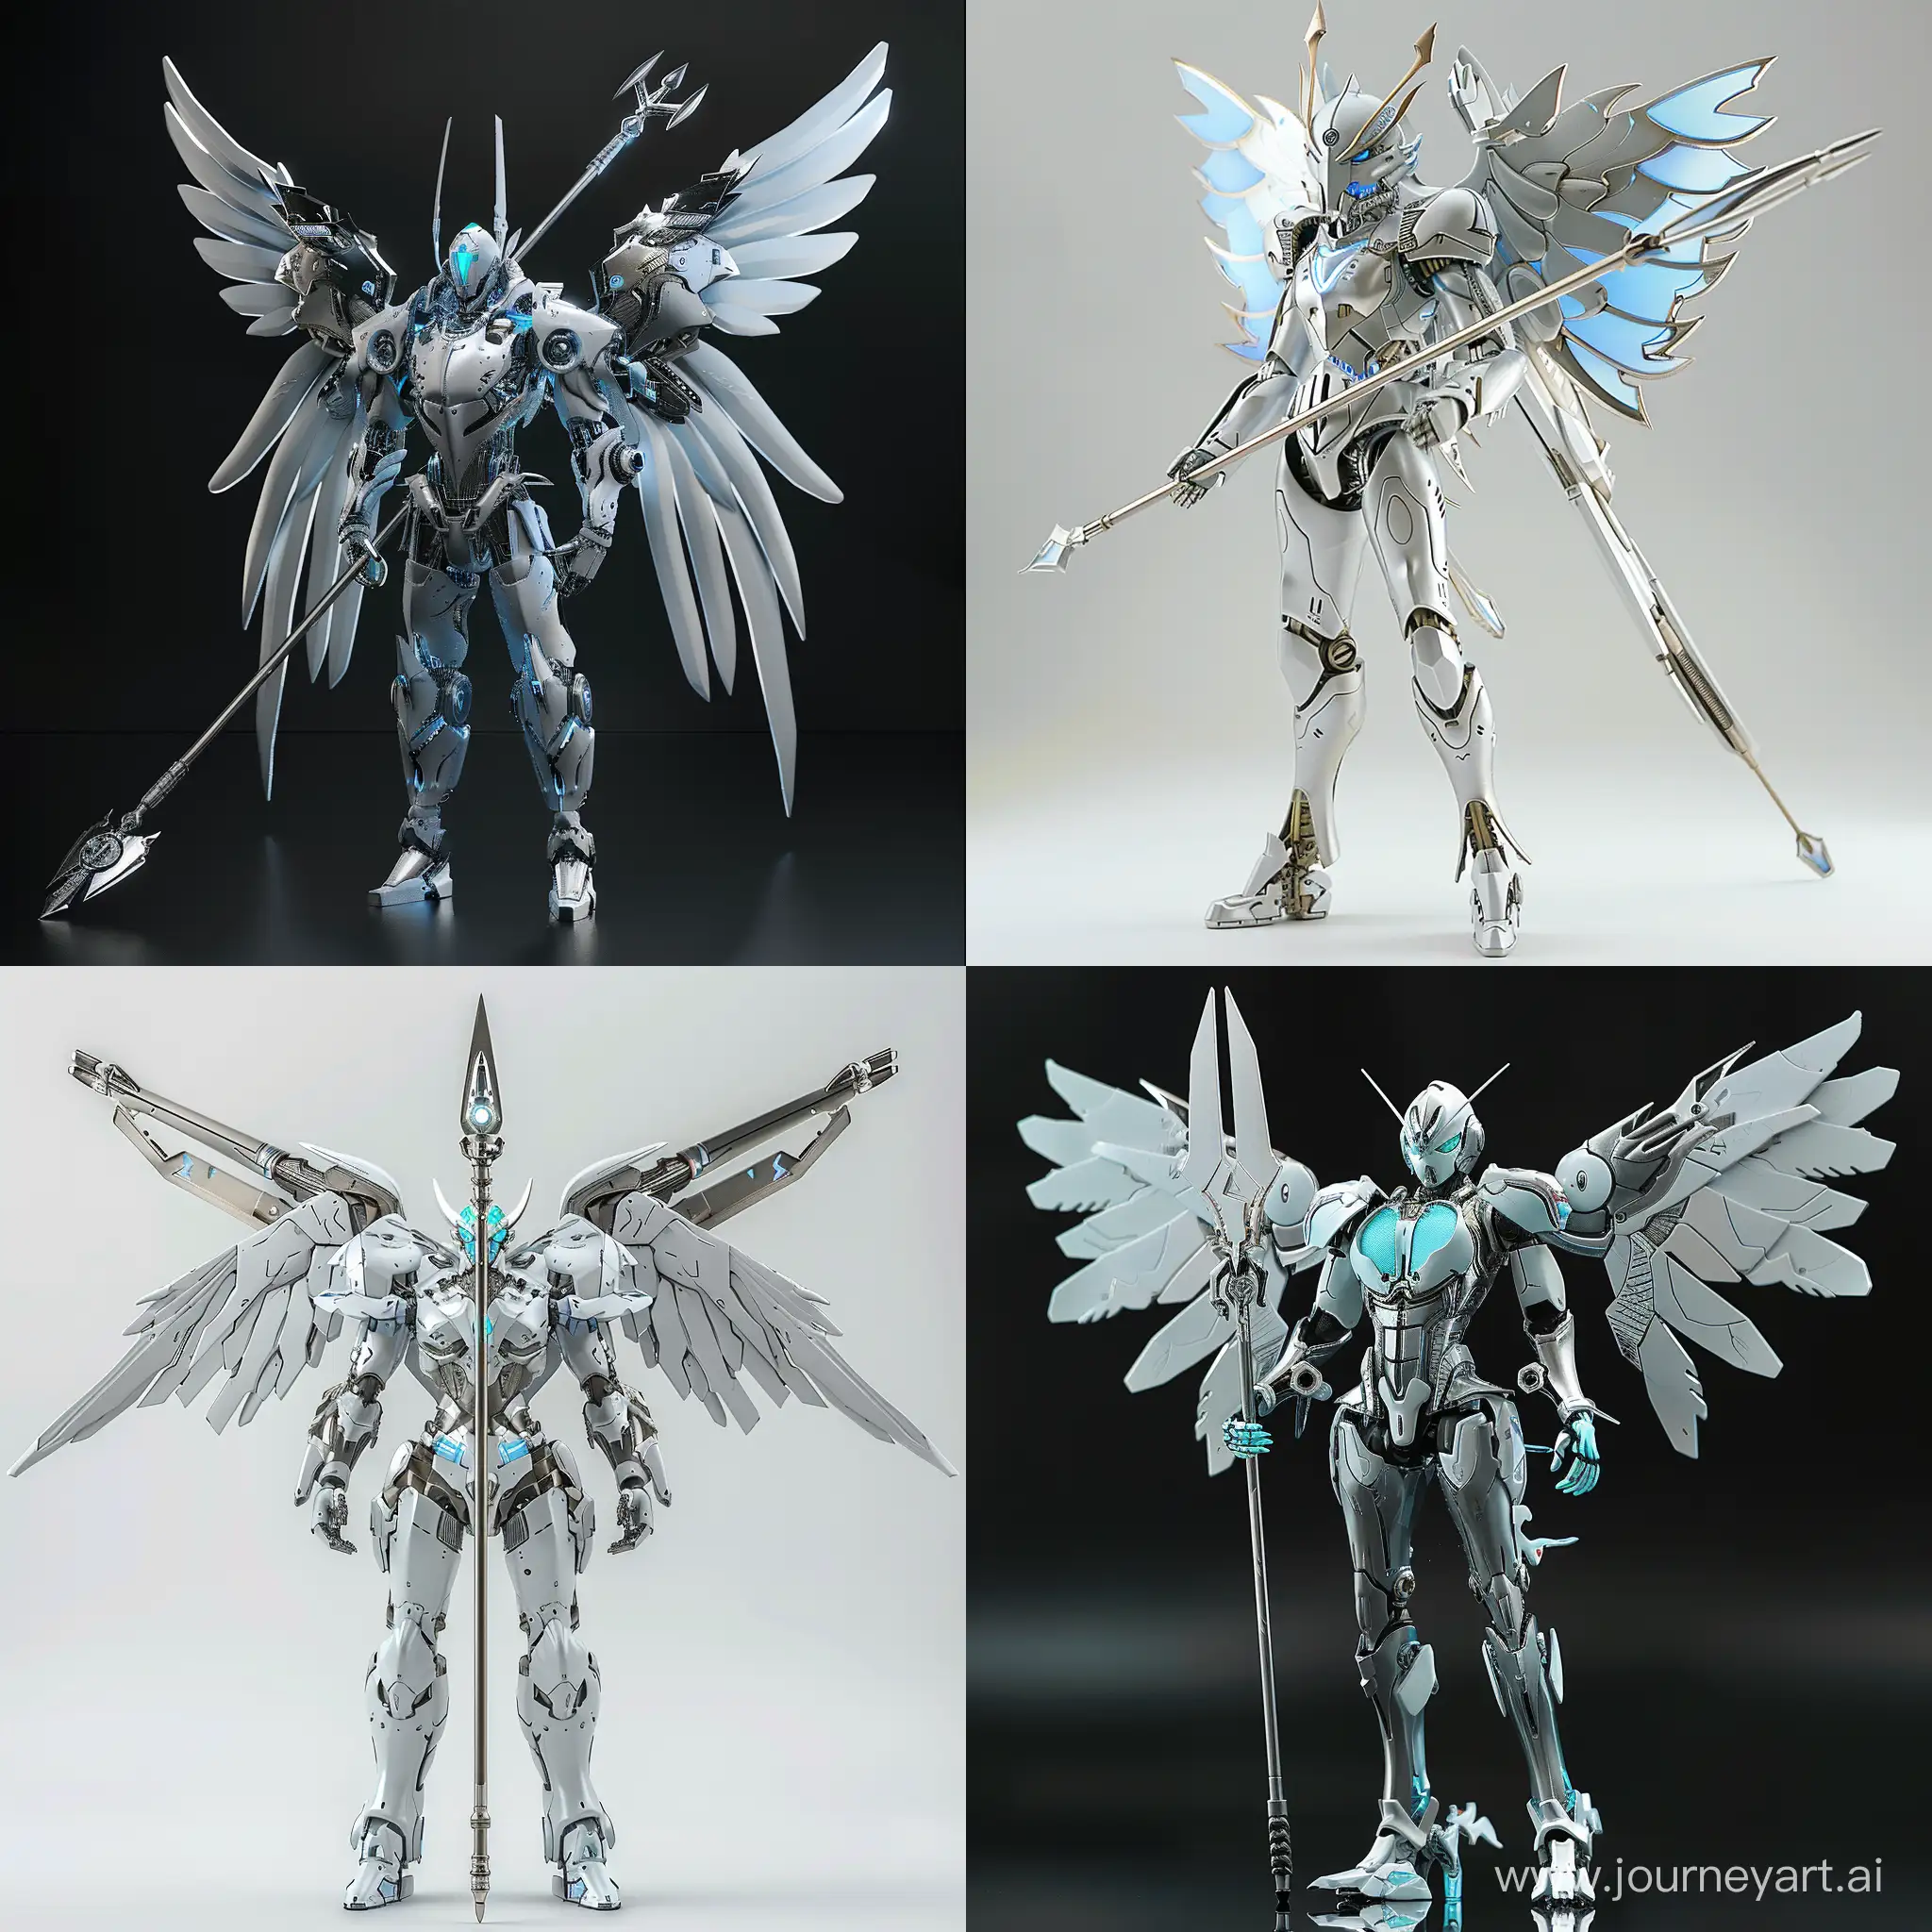 Silver-Armored-Anime-Winged-Mecha-Wielding-a-Giant-Spear-Cybuster-Style